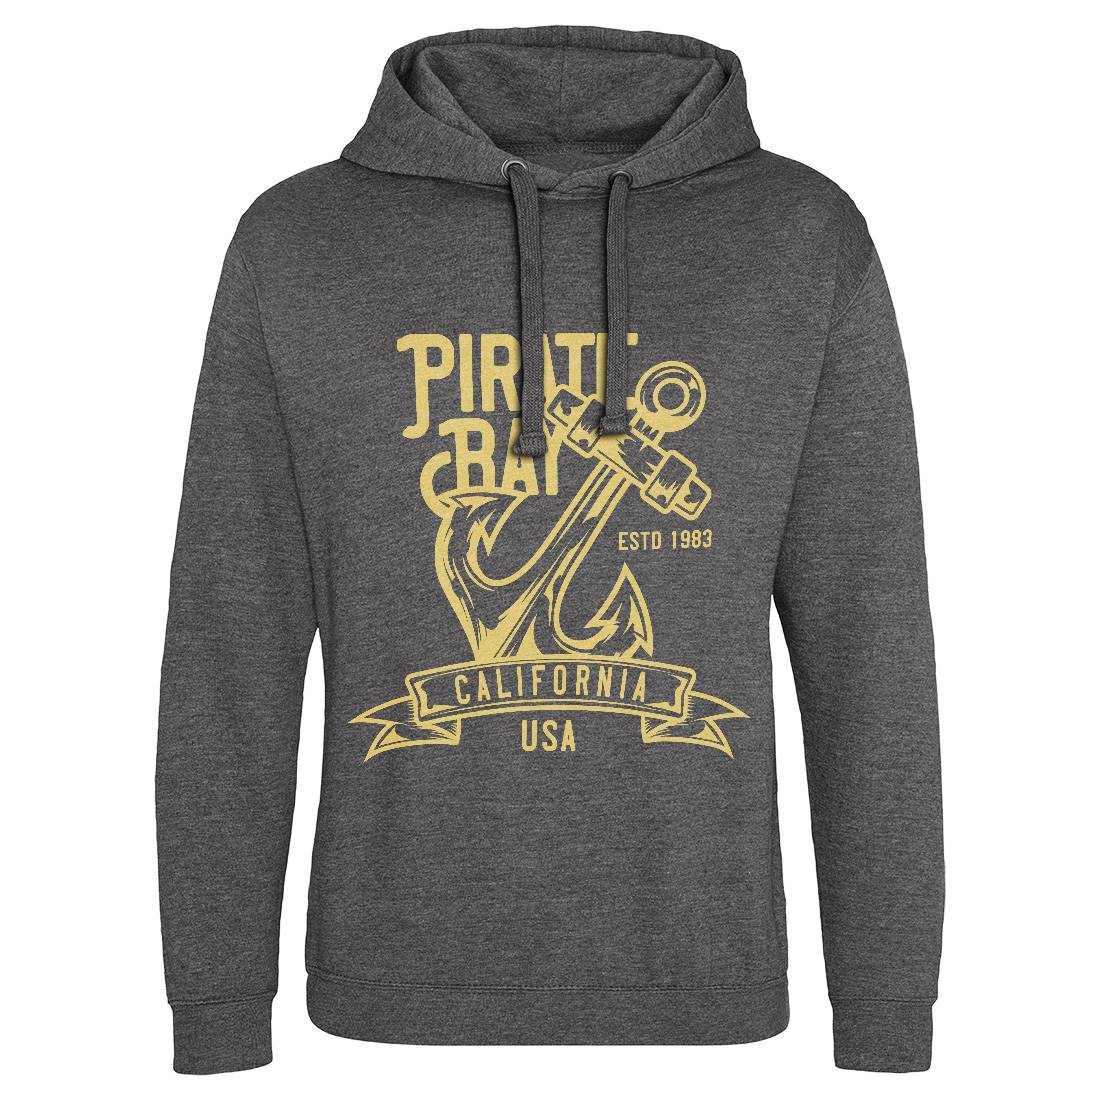 Pirate Mens Hoodie Without Pocket Navy B159